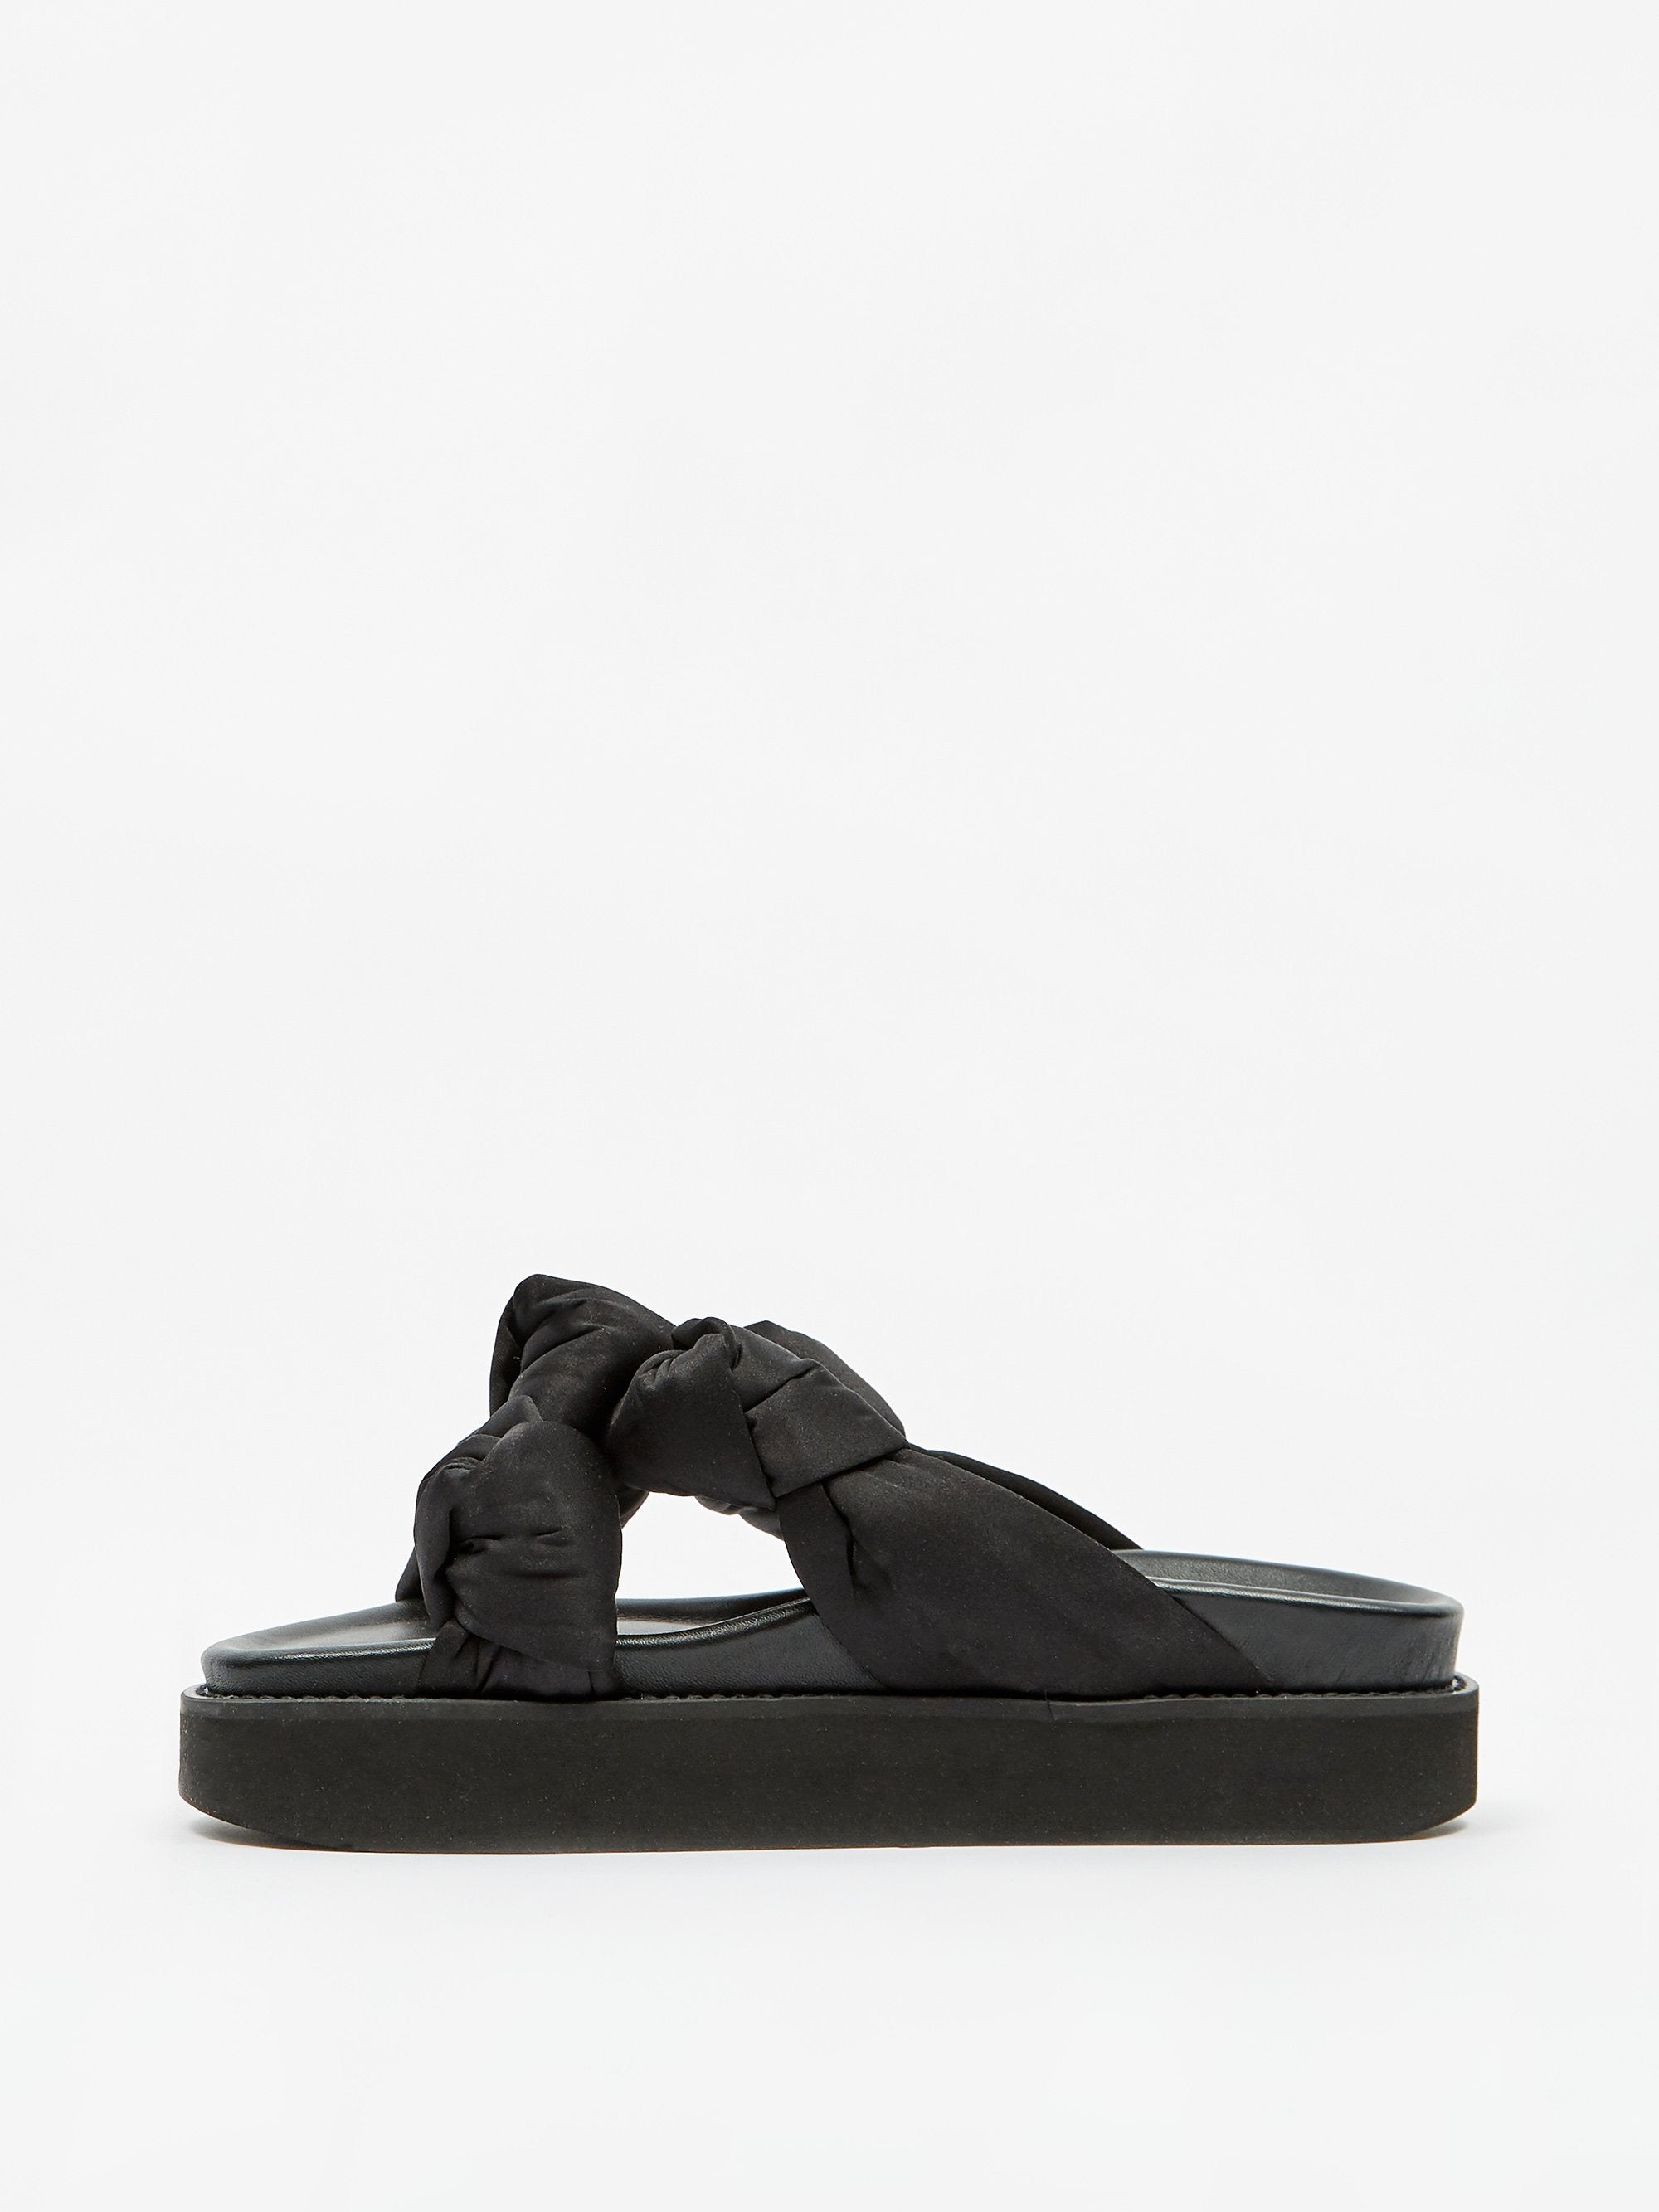 Ganni Recycled Satin Mid Knotted Sandal - Black